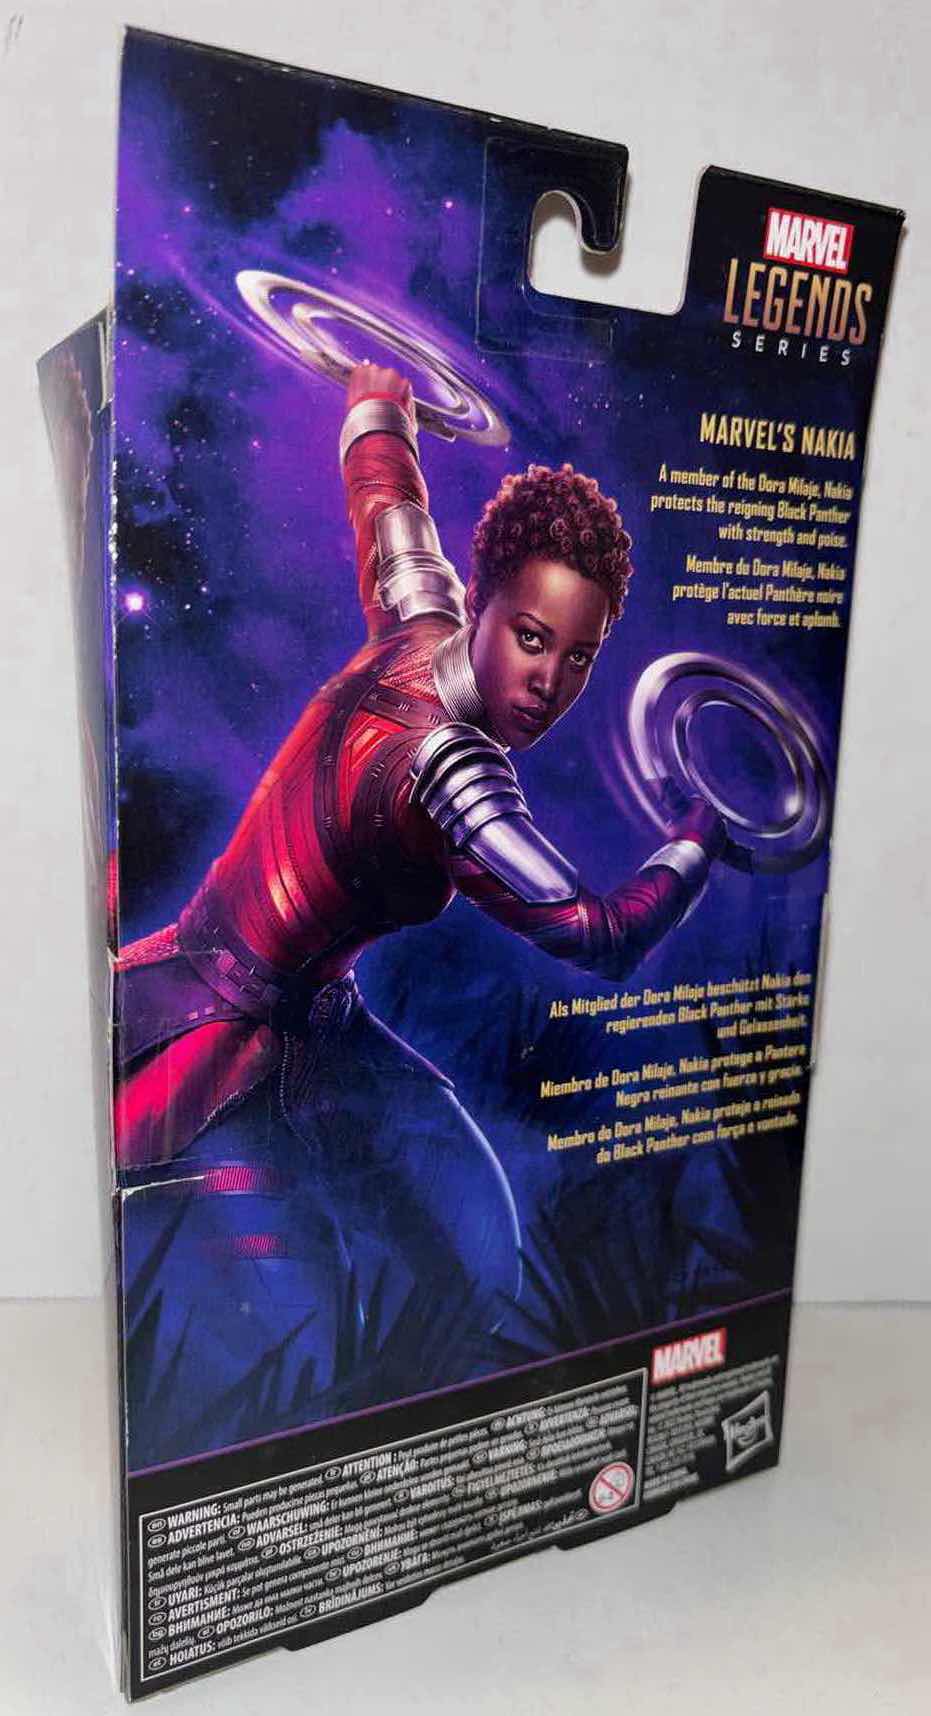 Photo 3 of NEW 2-PACK HASBRO MARVEL STUDIOS LEGACY COLLECTION LEGENDS SERIES BLACK PANTHER ACTION FIGURE & ACCESSORIES, “MARVEL’S NAKIA”